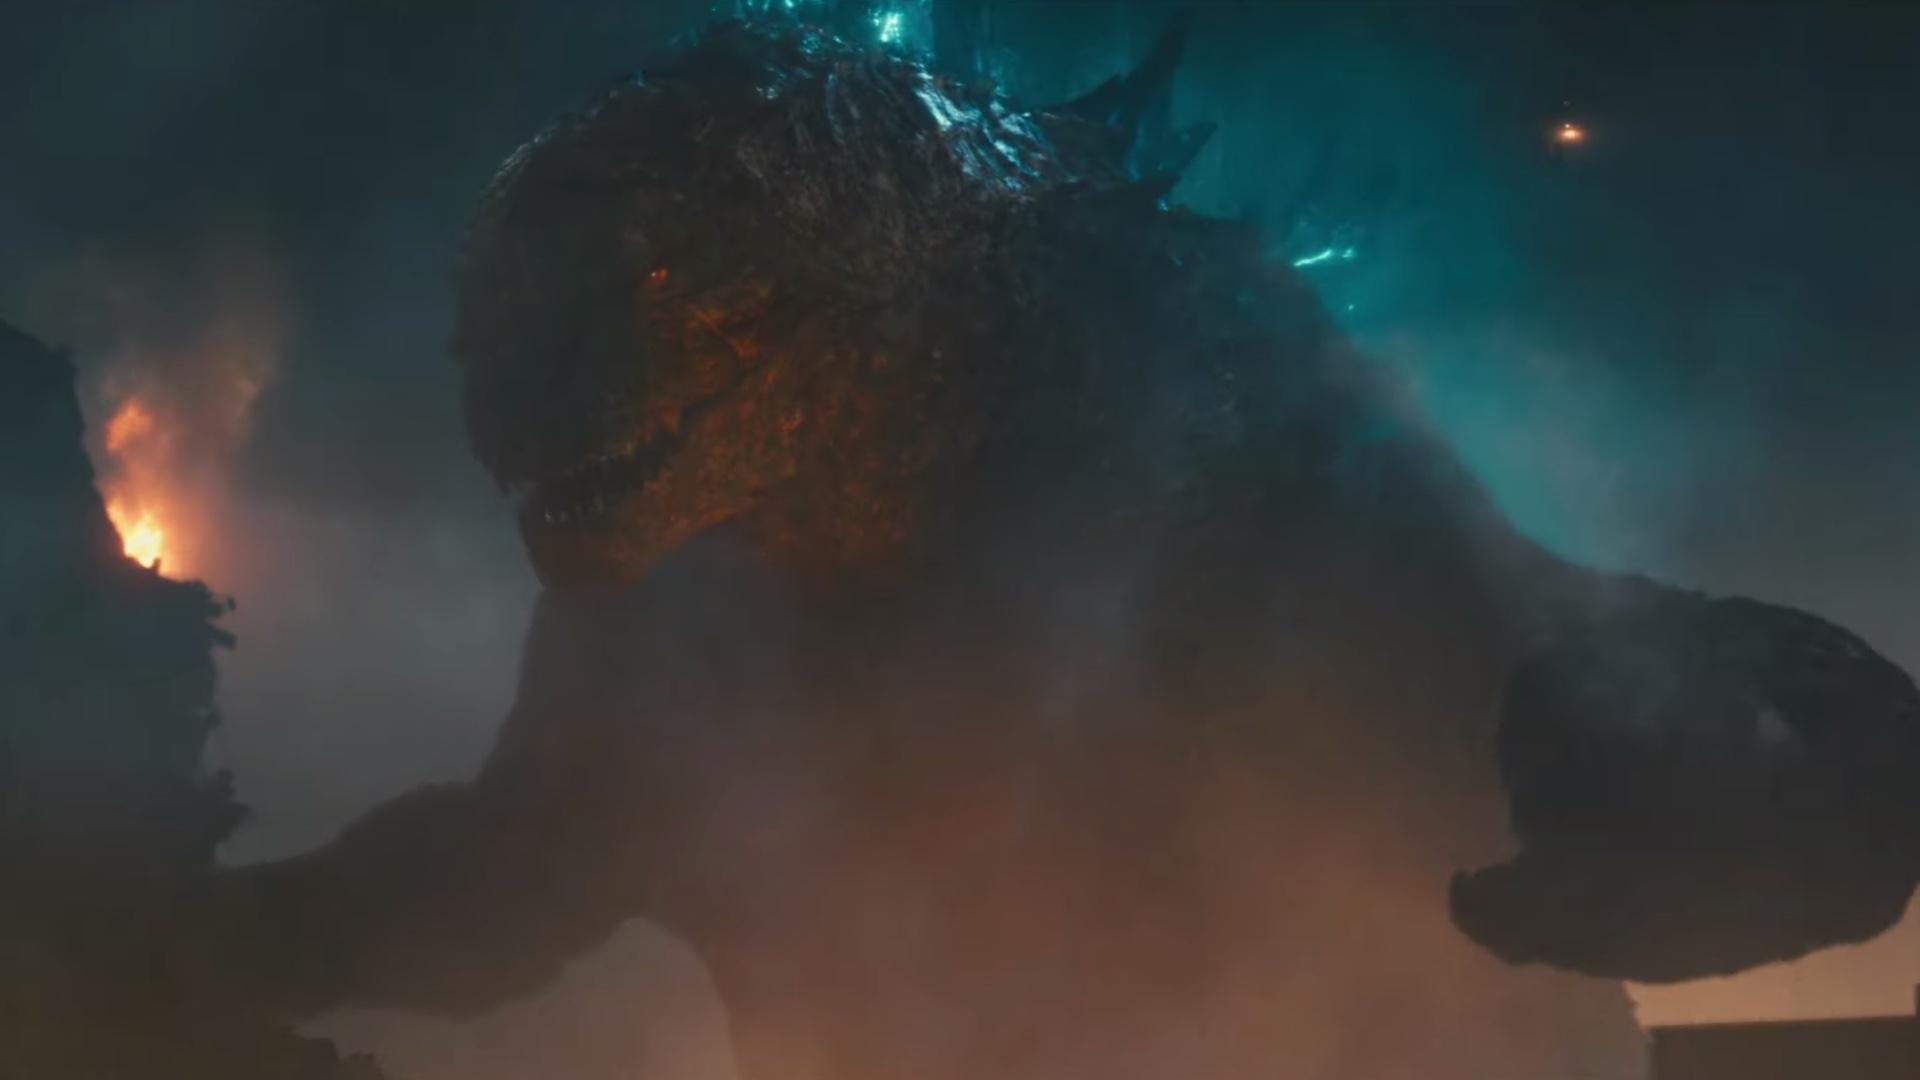 Epic, Jaw Dropping Final For GODZILLA: KING OF THE MONSTERS